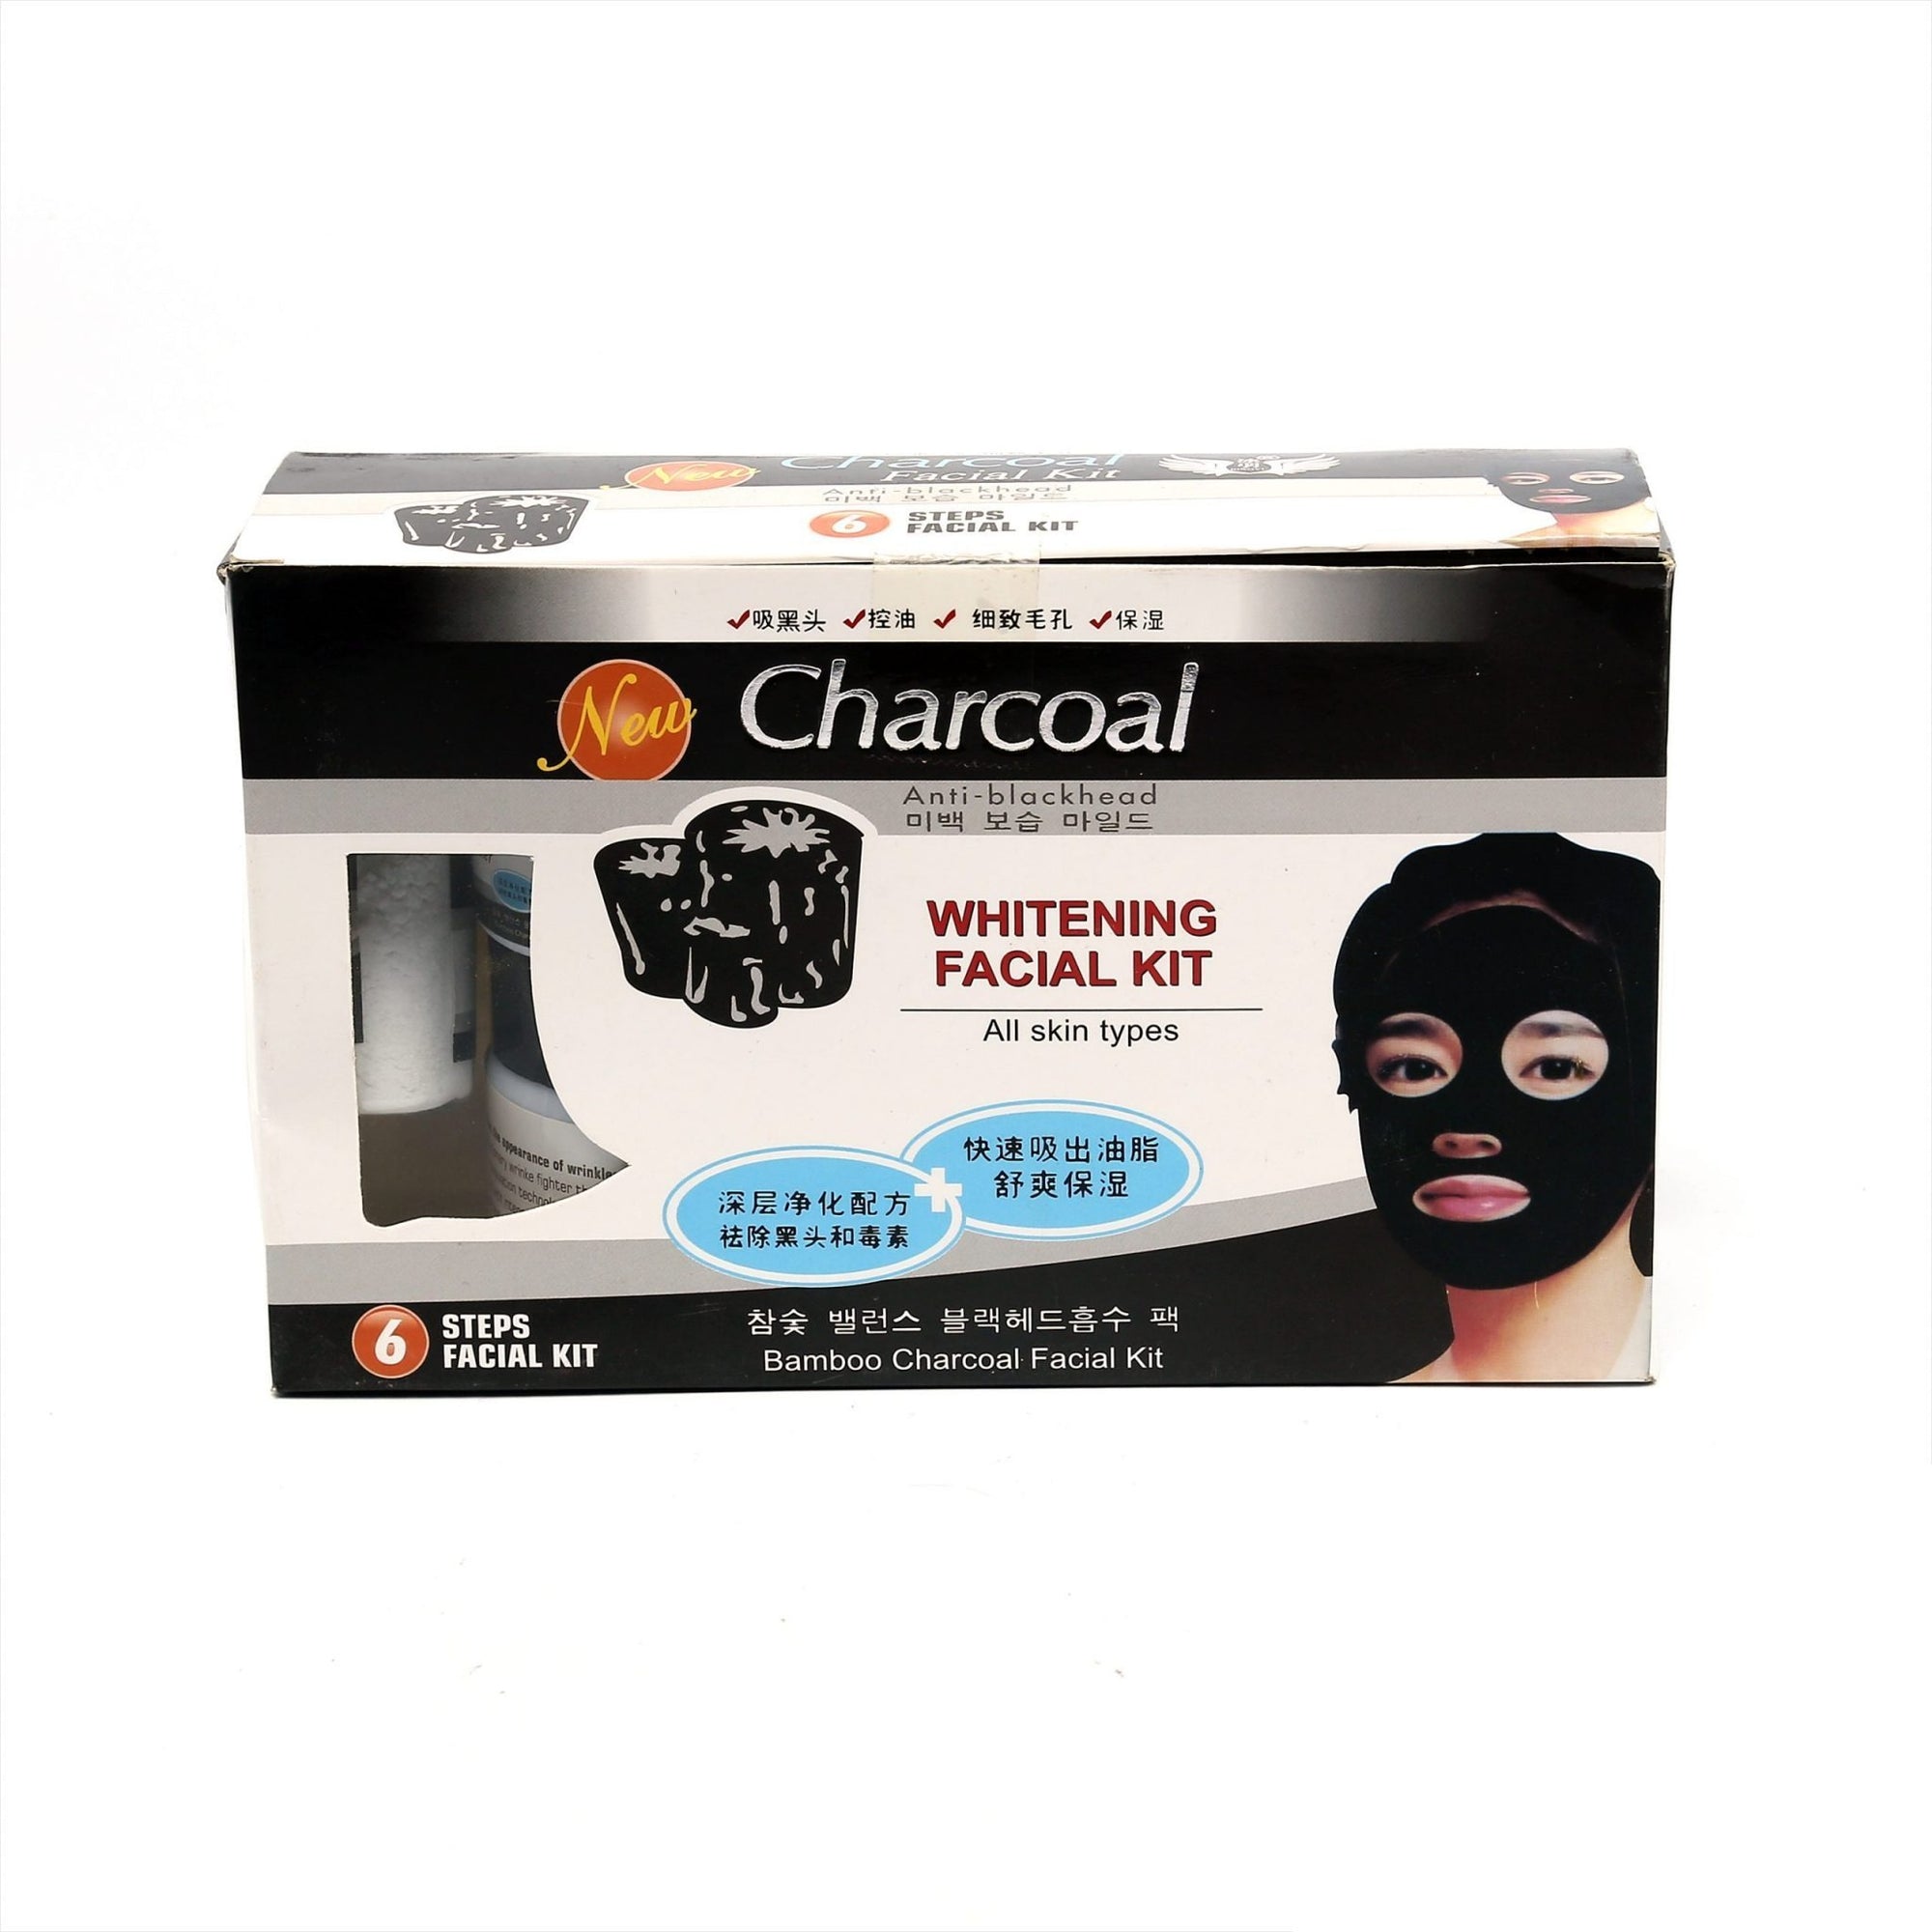 Charcoal Facial Kit Whitening Pack of 6 Bleach Cream & Powder - Double Action Cleanser - Massage - Scrub - Skin Polish - Mask freeshipping - lasertag.pk